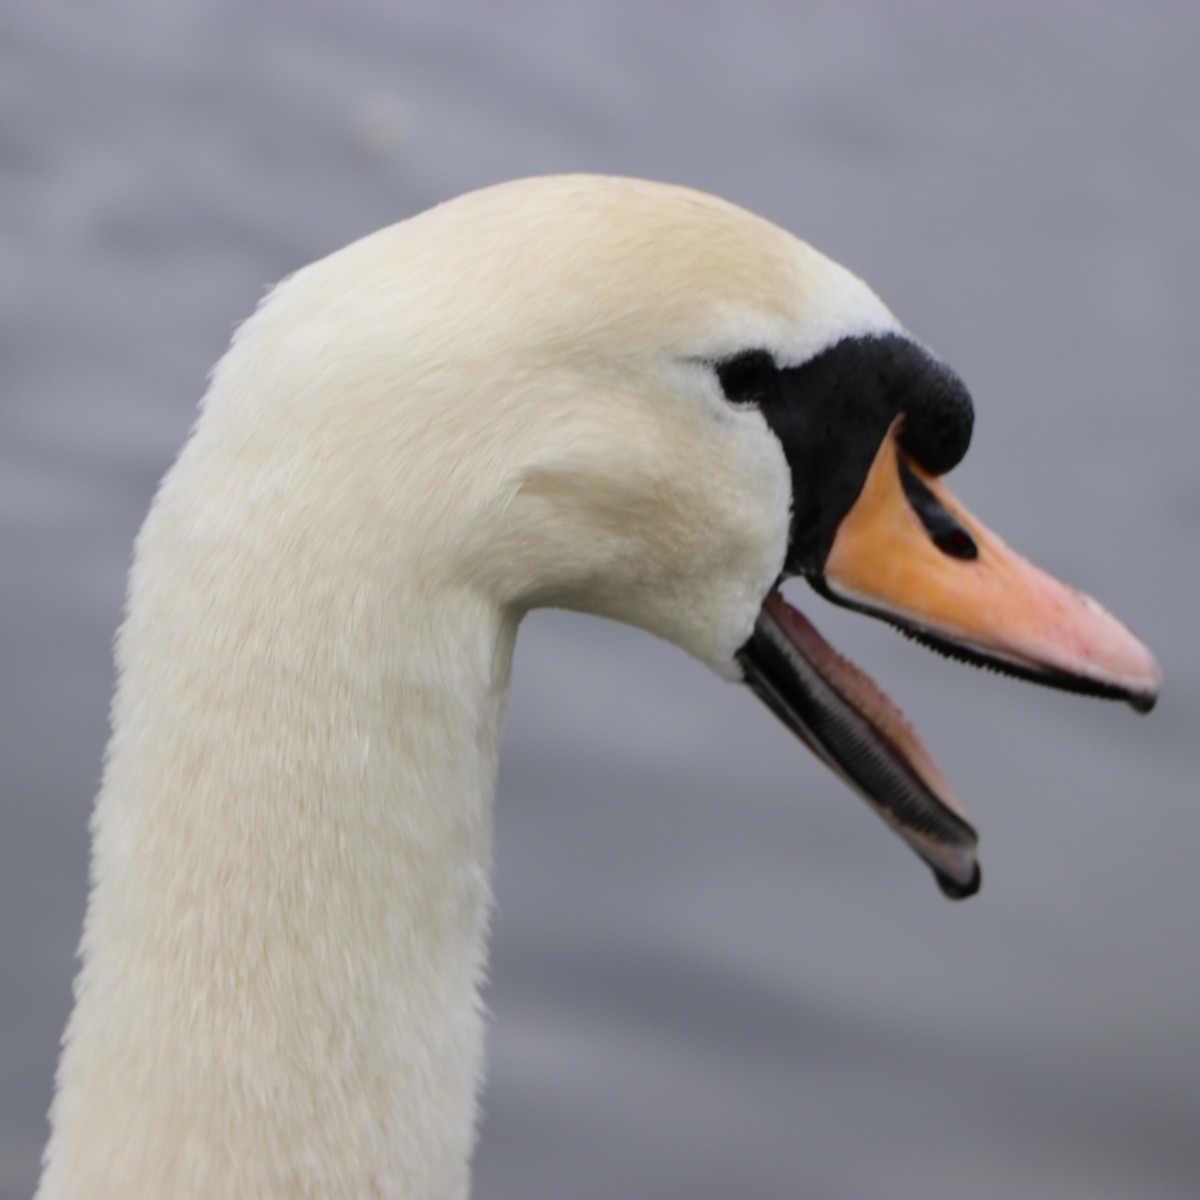 I wonder what this swan is saying? Comment below!